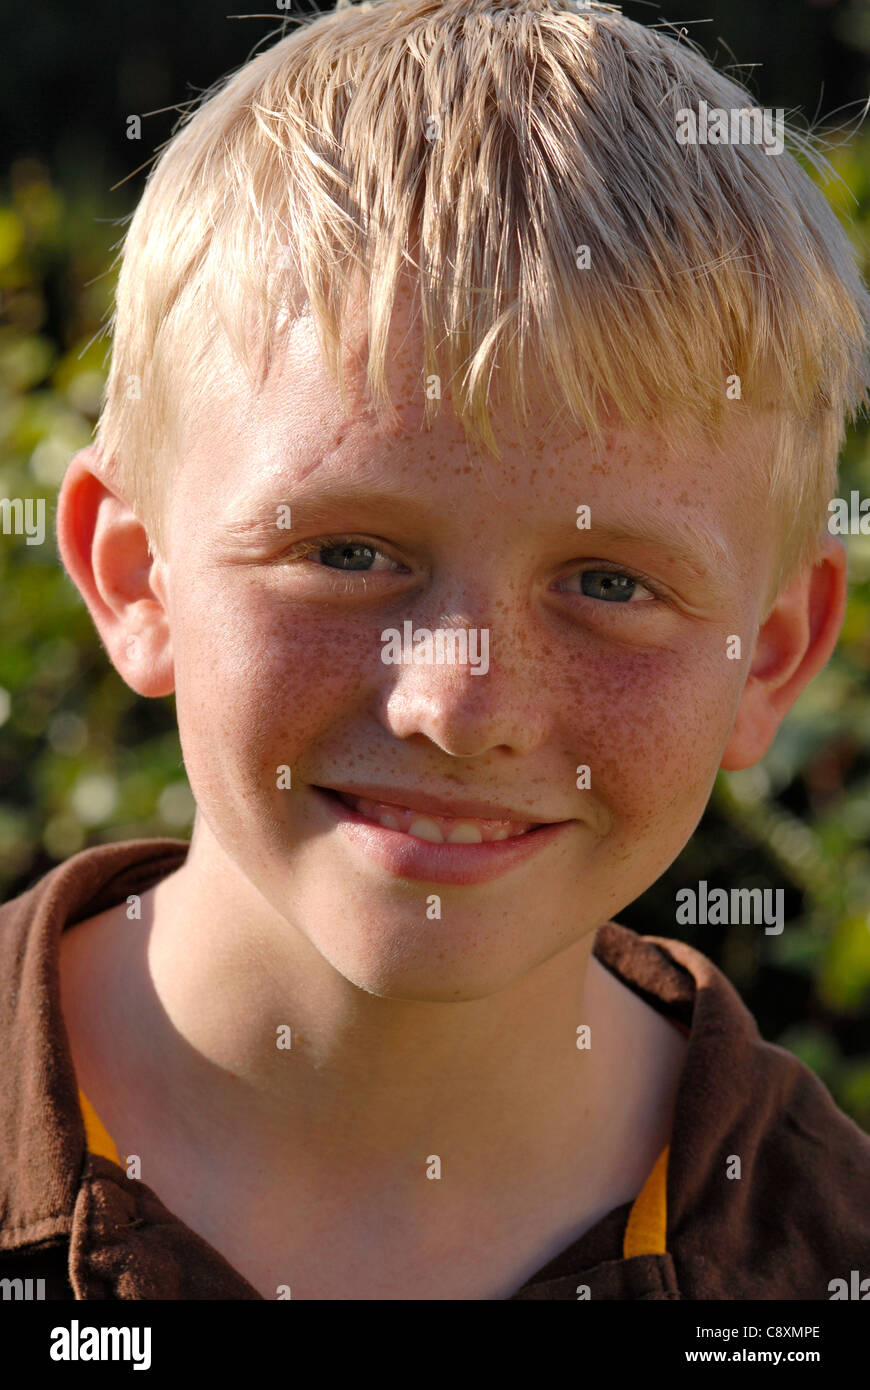 Portrait of a boy with blond hair and freckles Stock Photo - Alamy